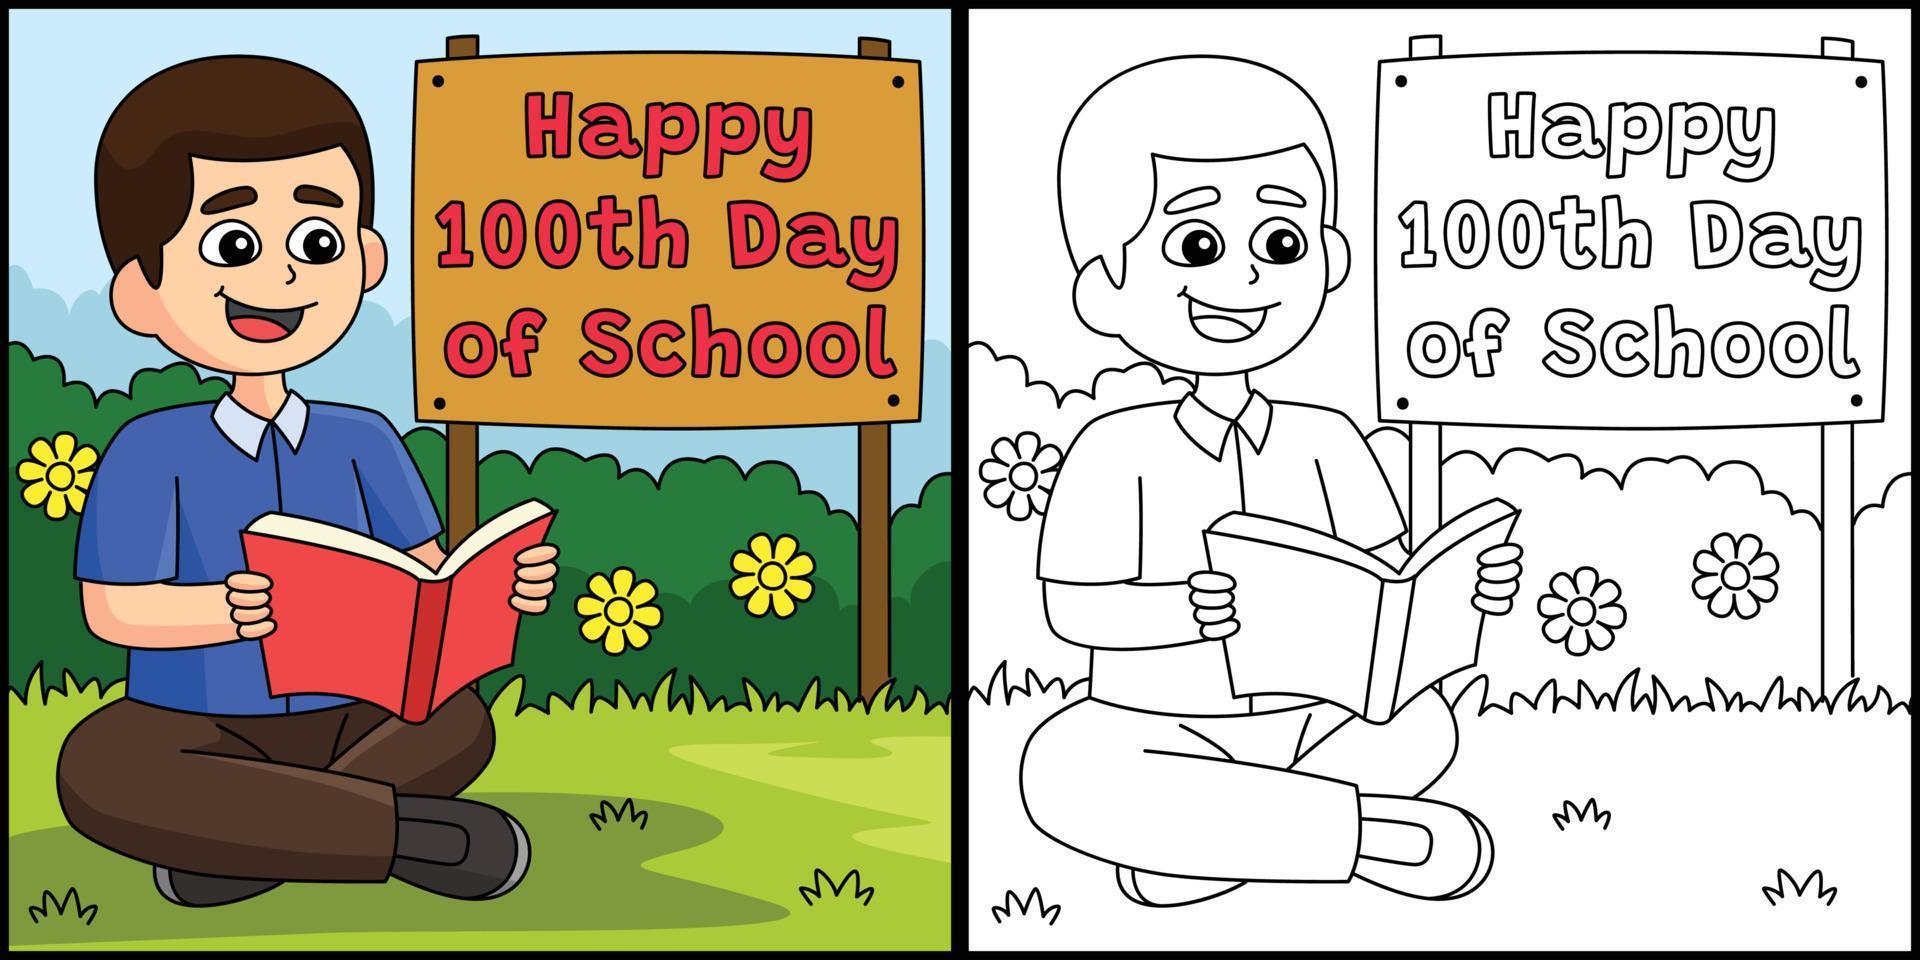 100th Day Of School Student with Book Illustration vector